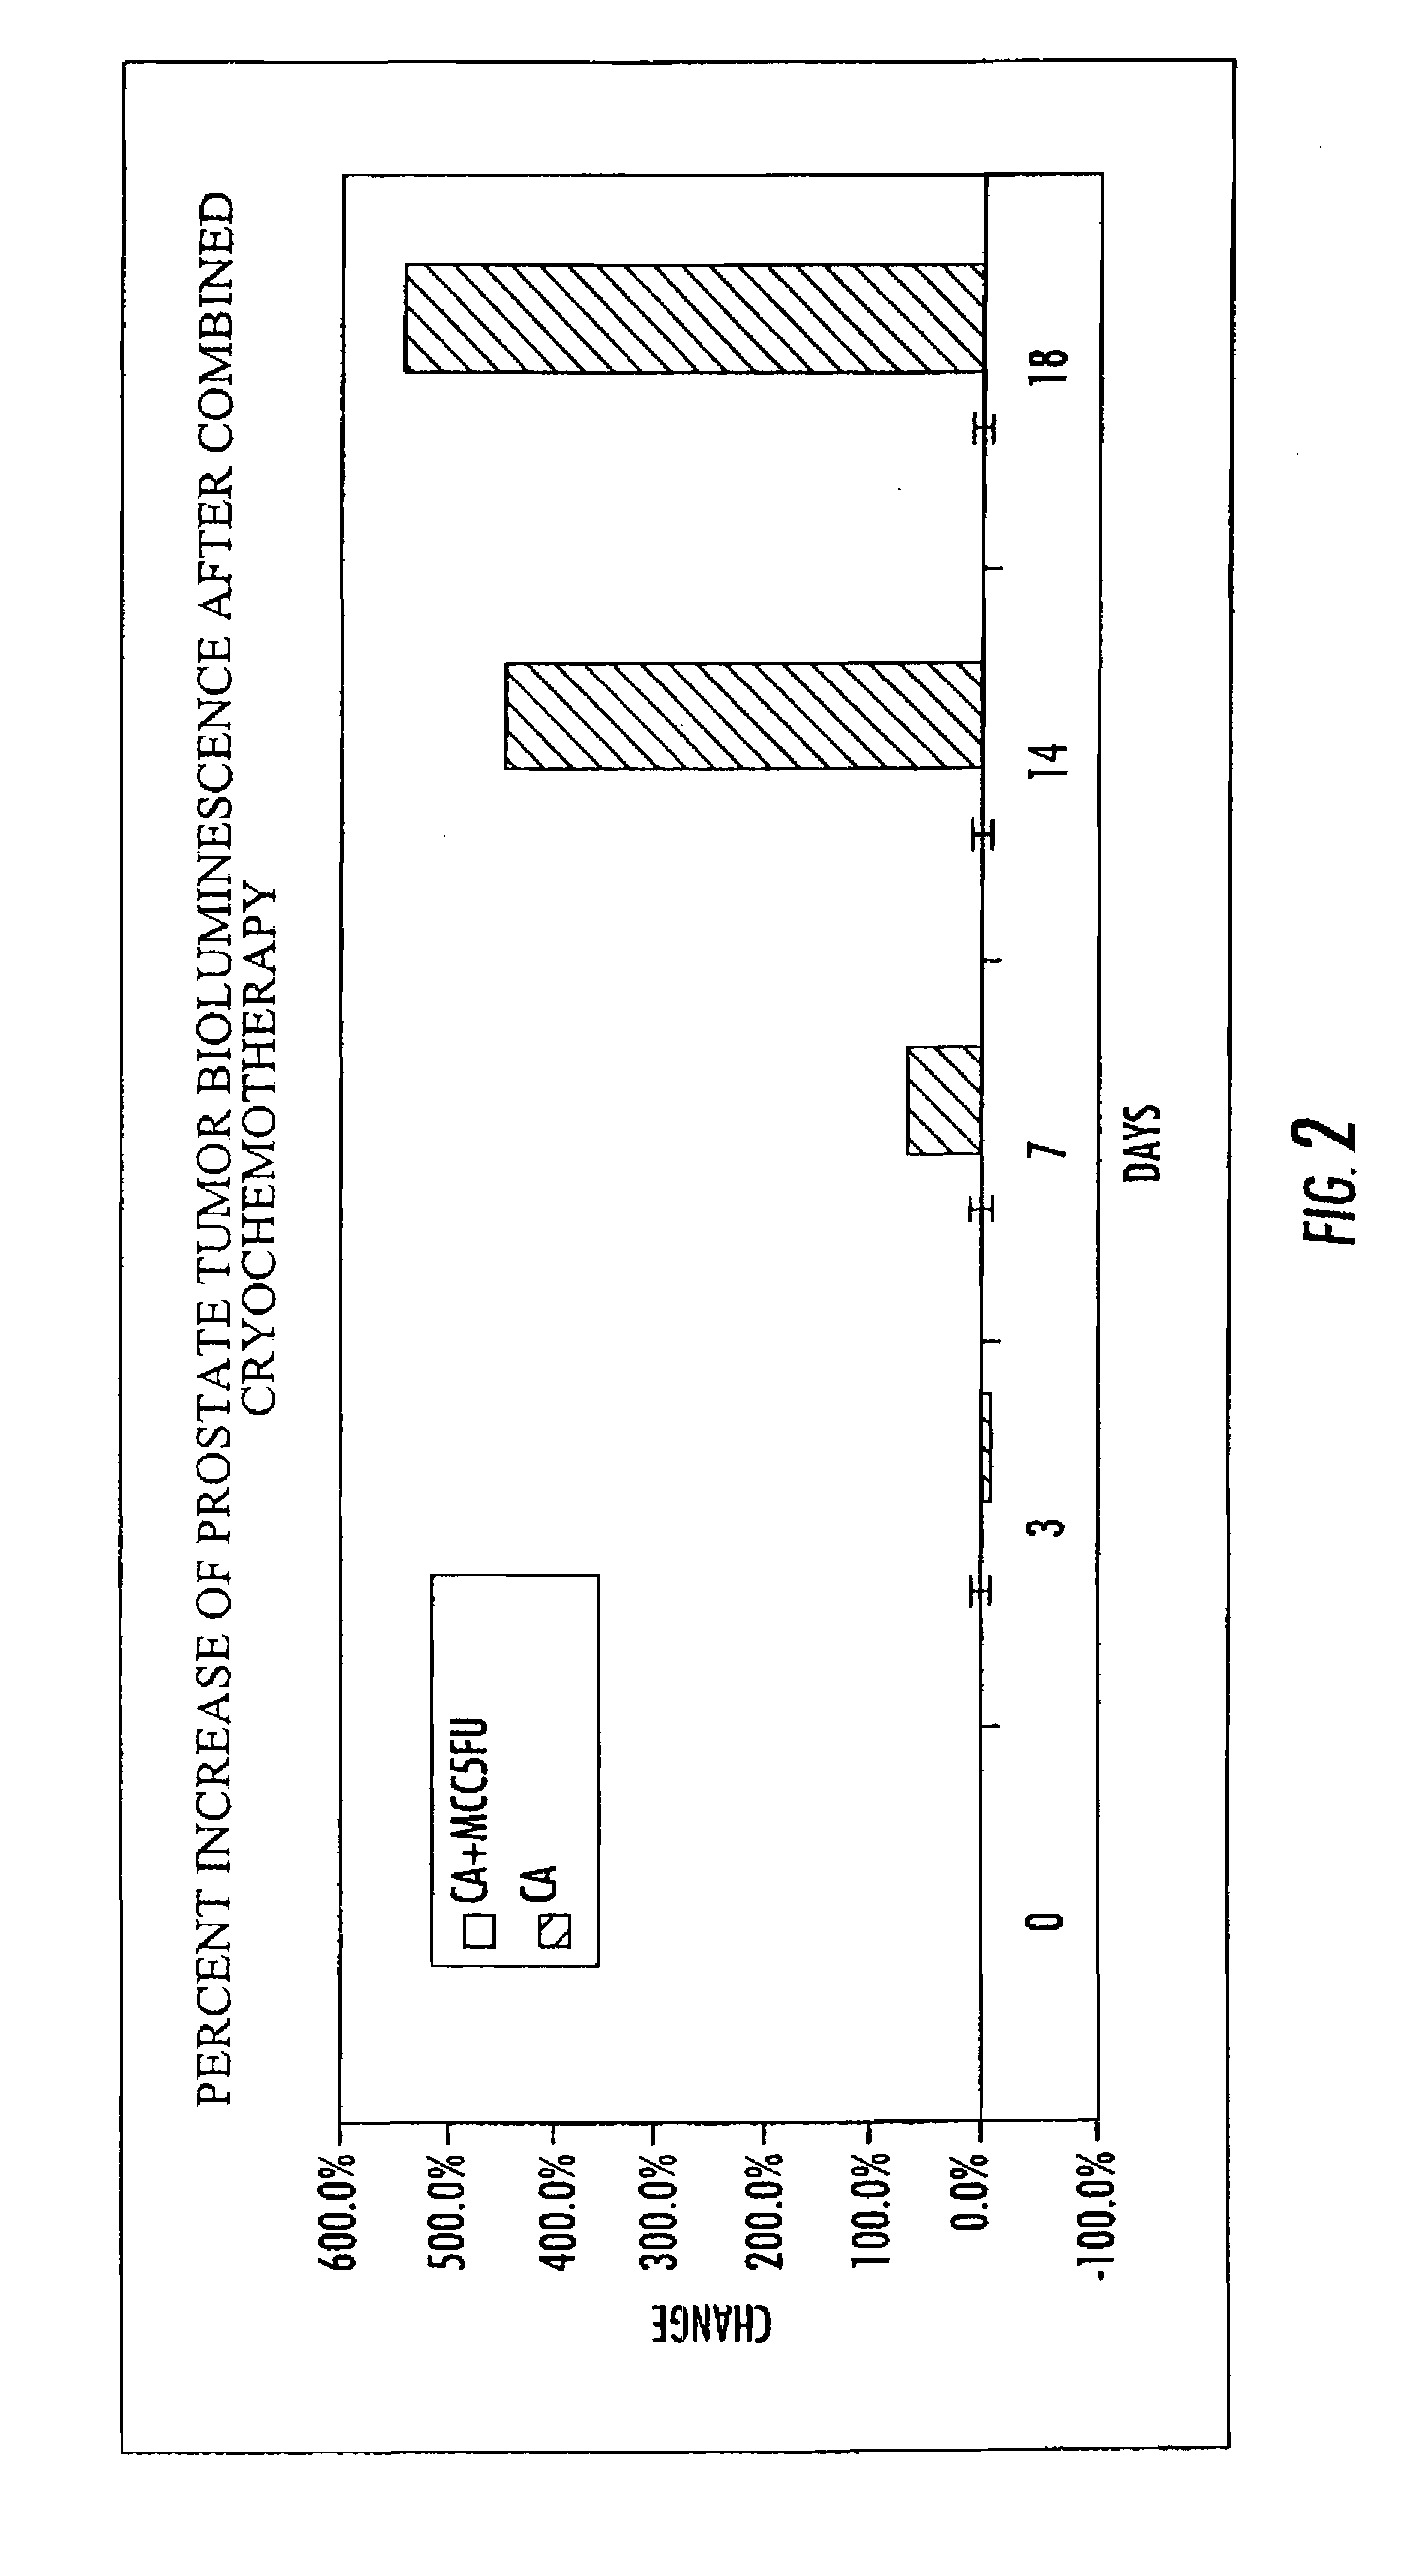 Methods for improved cryo-chemotherapy tissue ablation